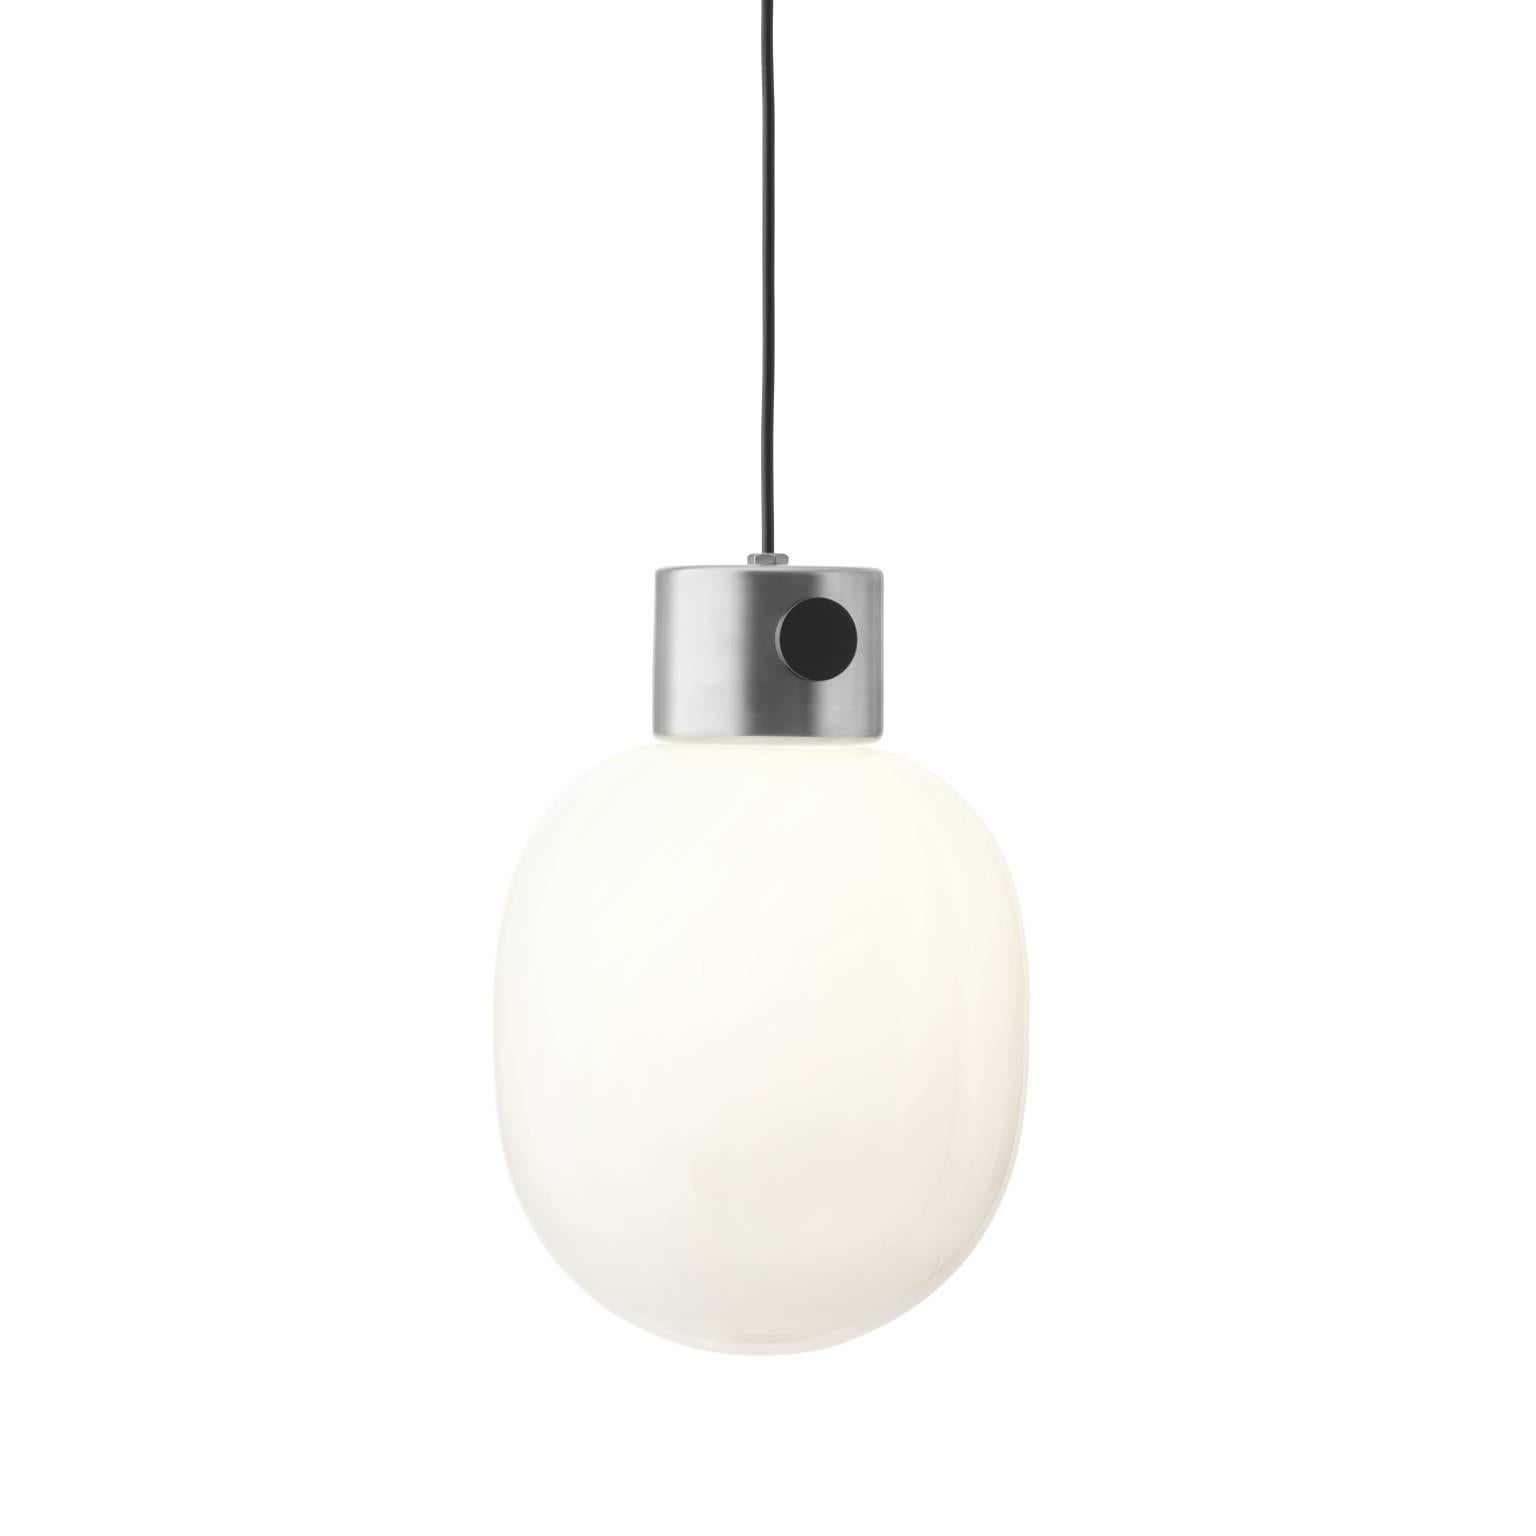 JWDA pendant is part of a series of lamps inspired by traditional oil lamps. The lamp is made from honest materials – metal and glass – ennobled by the refinement of its design. Simplified and reduced of clutter to its essence, JWDA is a Minimalist